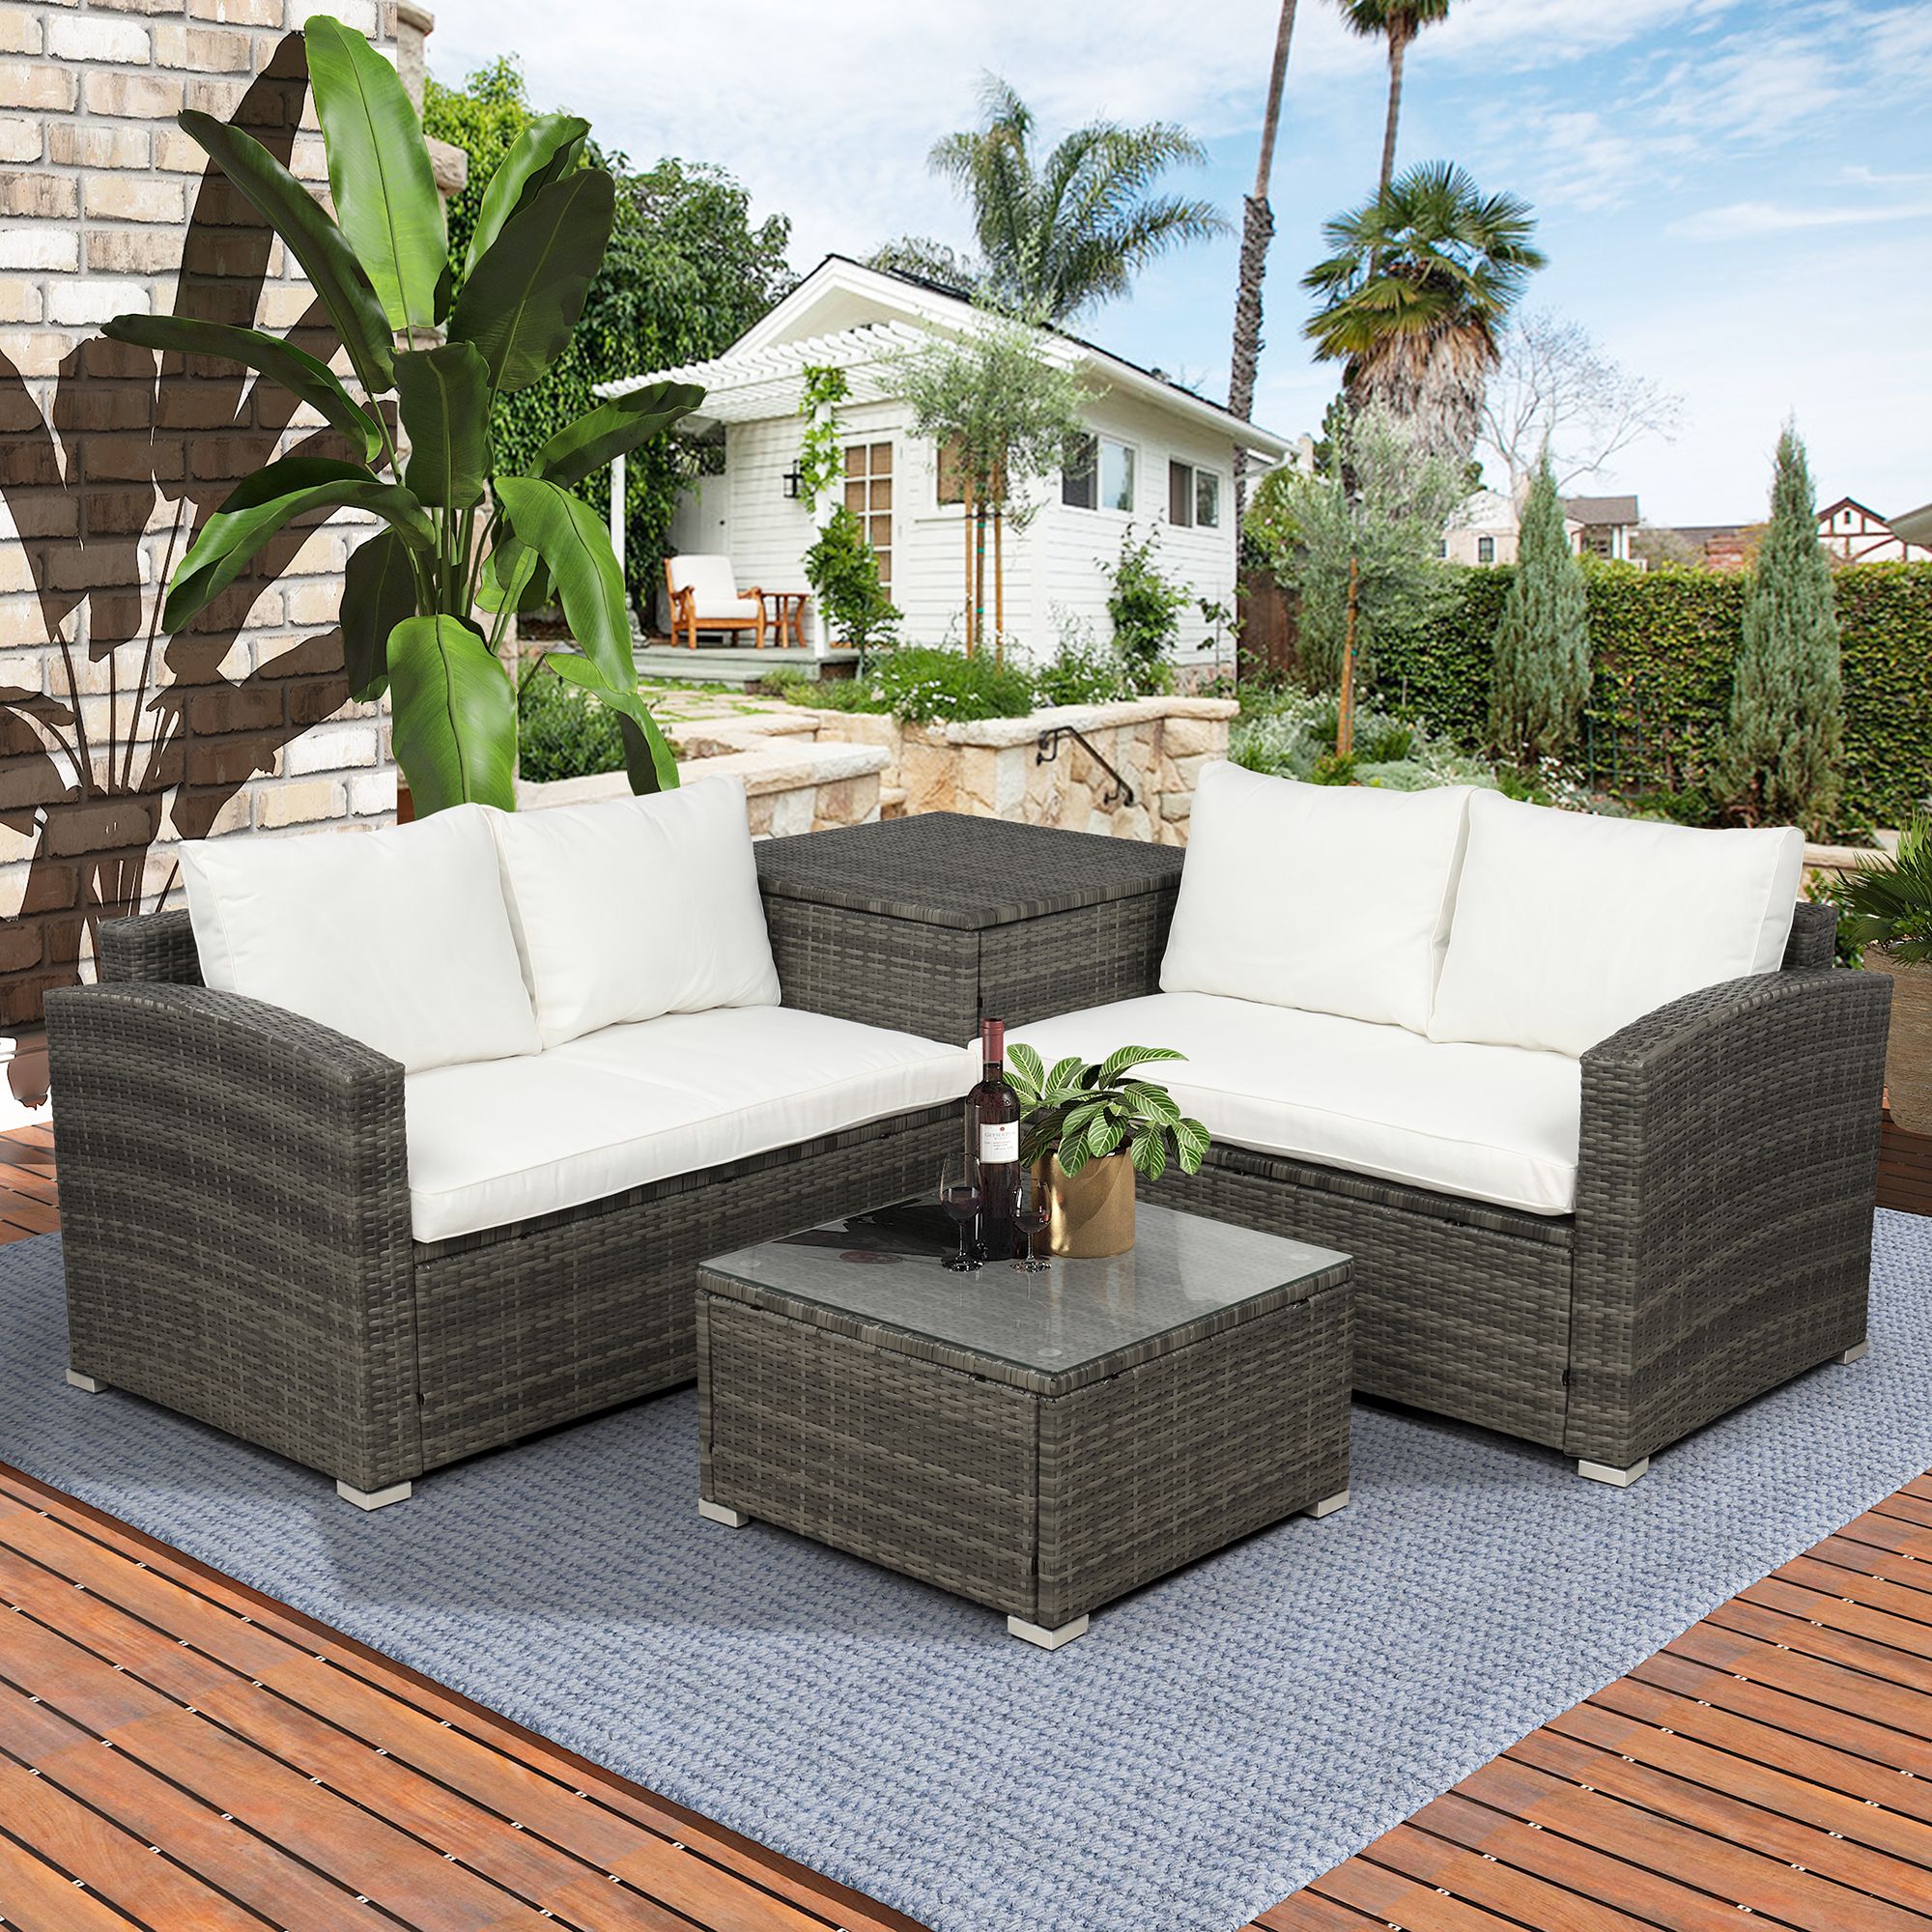 4 Piece Rattan Patio Furniture Sets, Wicker Bistro Patio Set With With Regard To 4 Piece Gray Outdoor Patio Seating Sets (View 5 of 15)